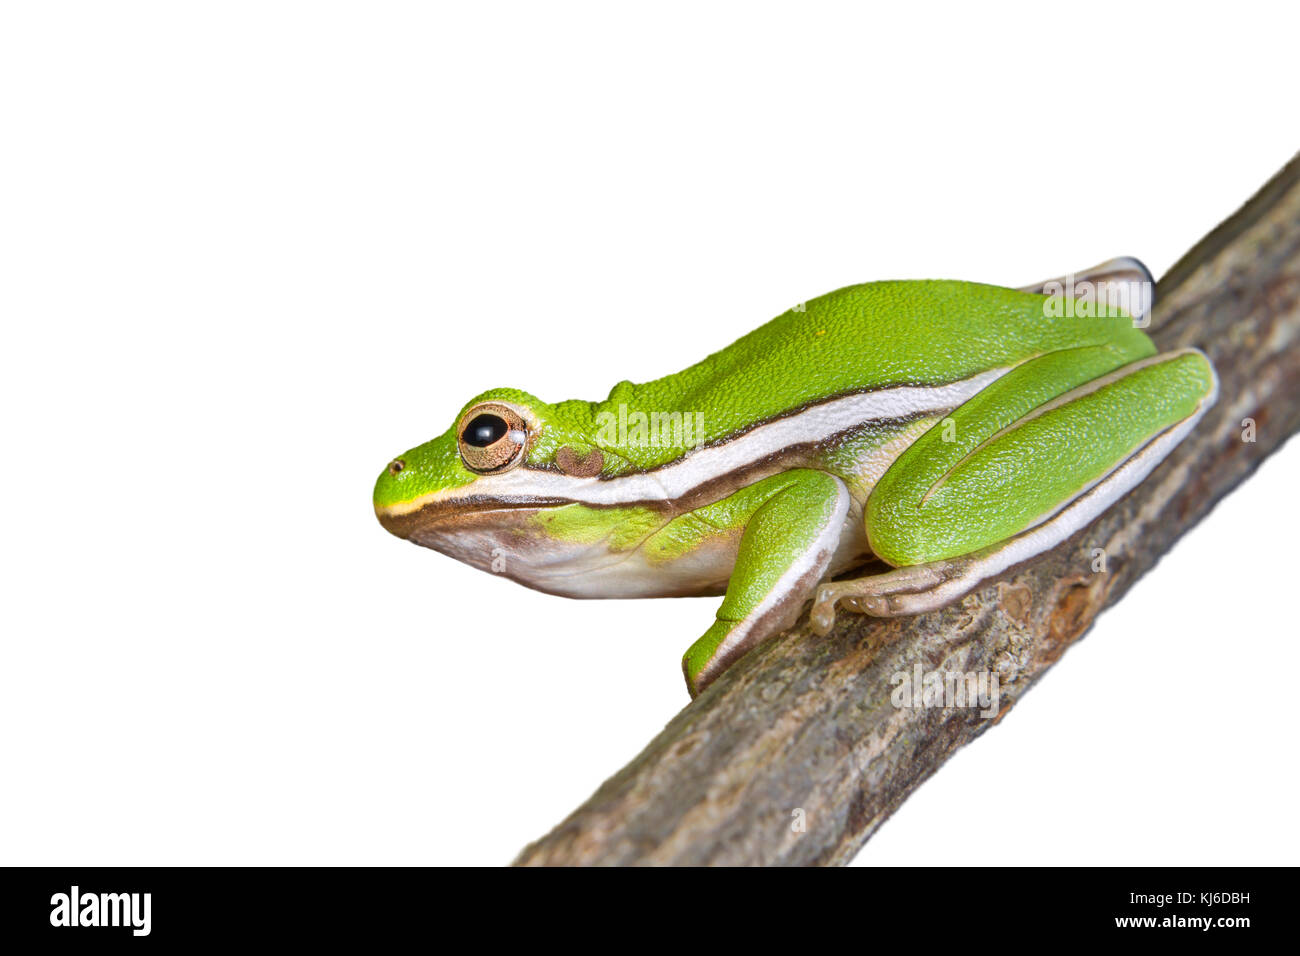 American green tree frog (Hyla cinerea), isolated on white background. Stock Photo